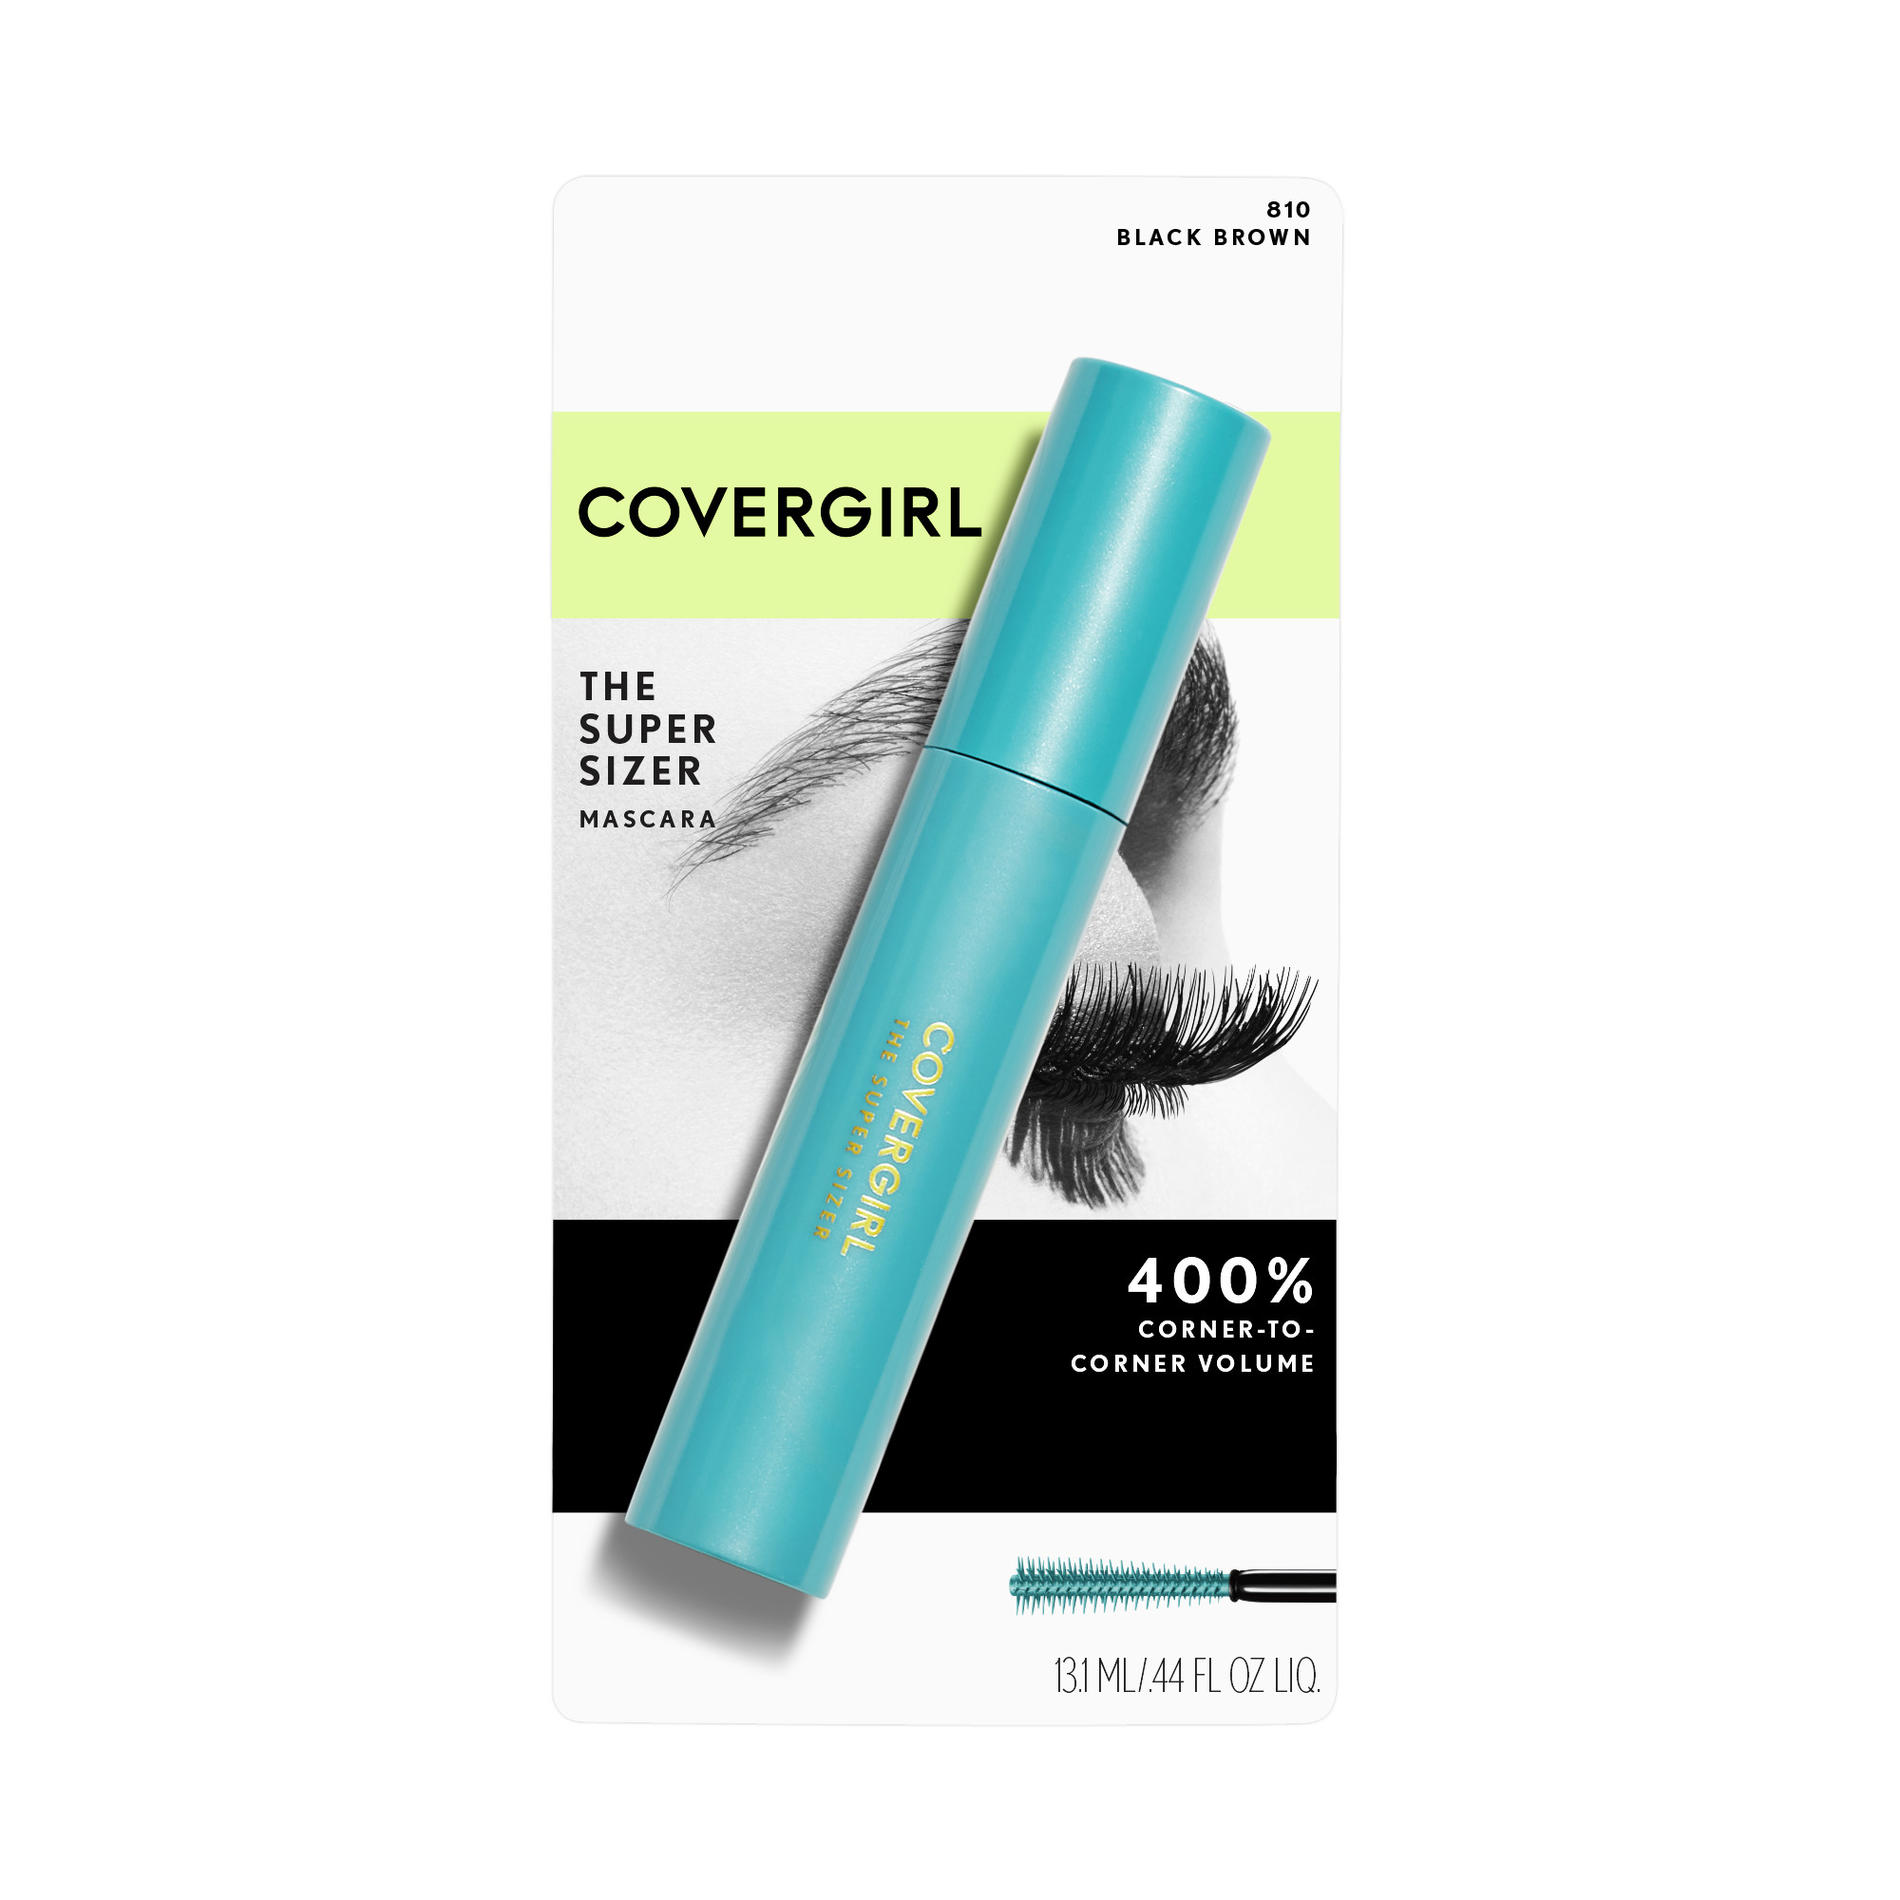 COVERGIRL Super Sizer Mascara, 810 Black Brown, 0.4 oz, Volume and Length Mascara, Fiber Length Formula, Fanned Lashes That Last All Day, Waterproof & Non-Waterproof Formulas - image 3 of 4